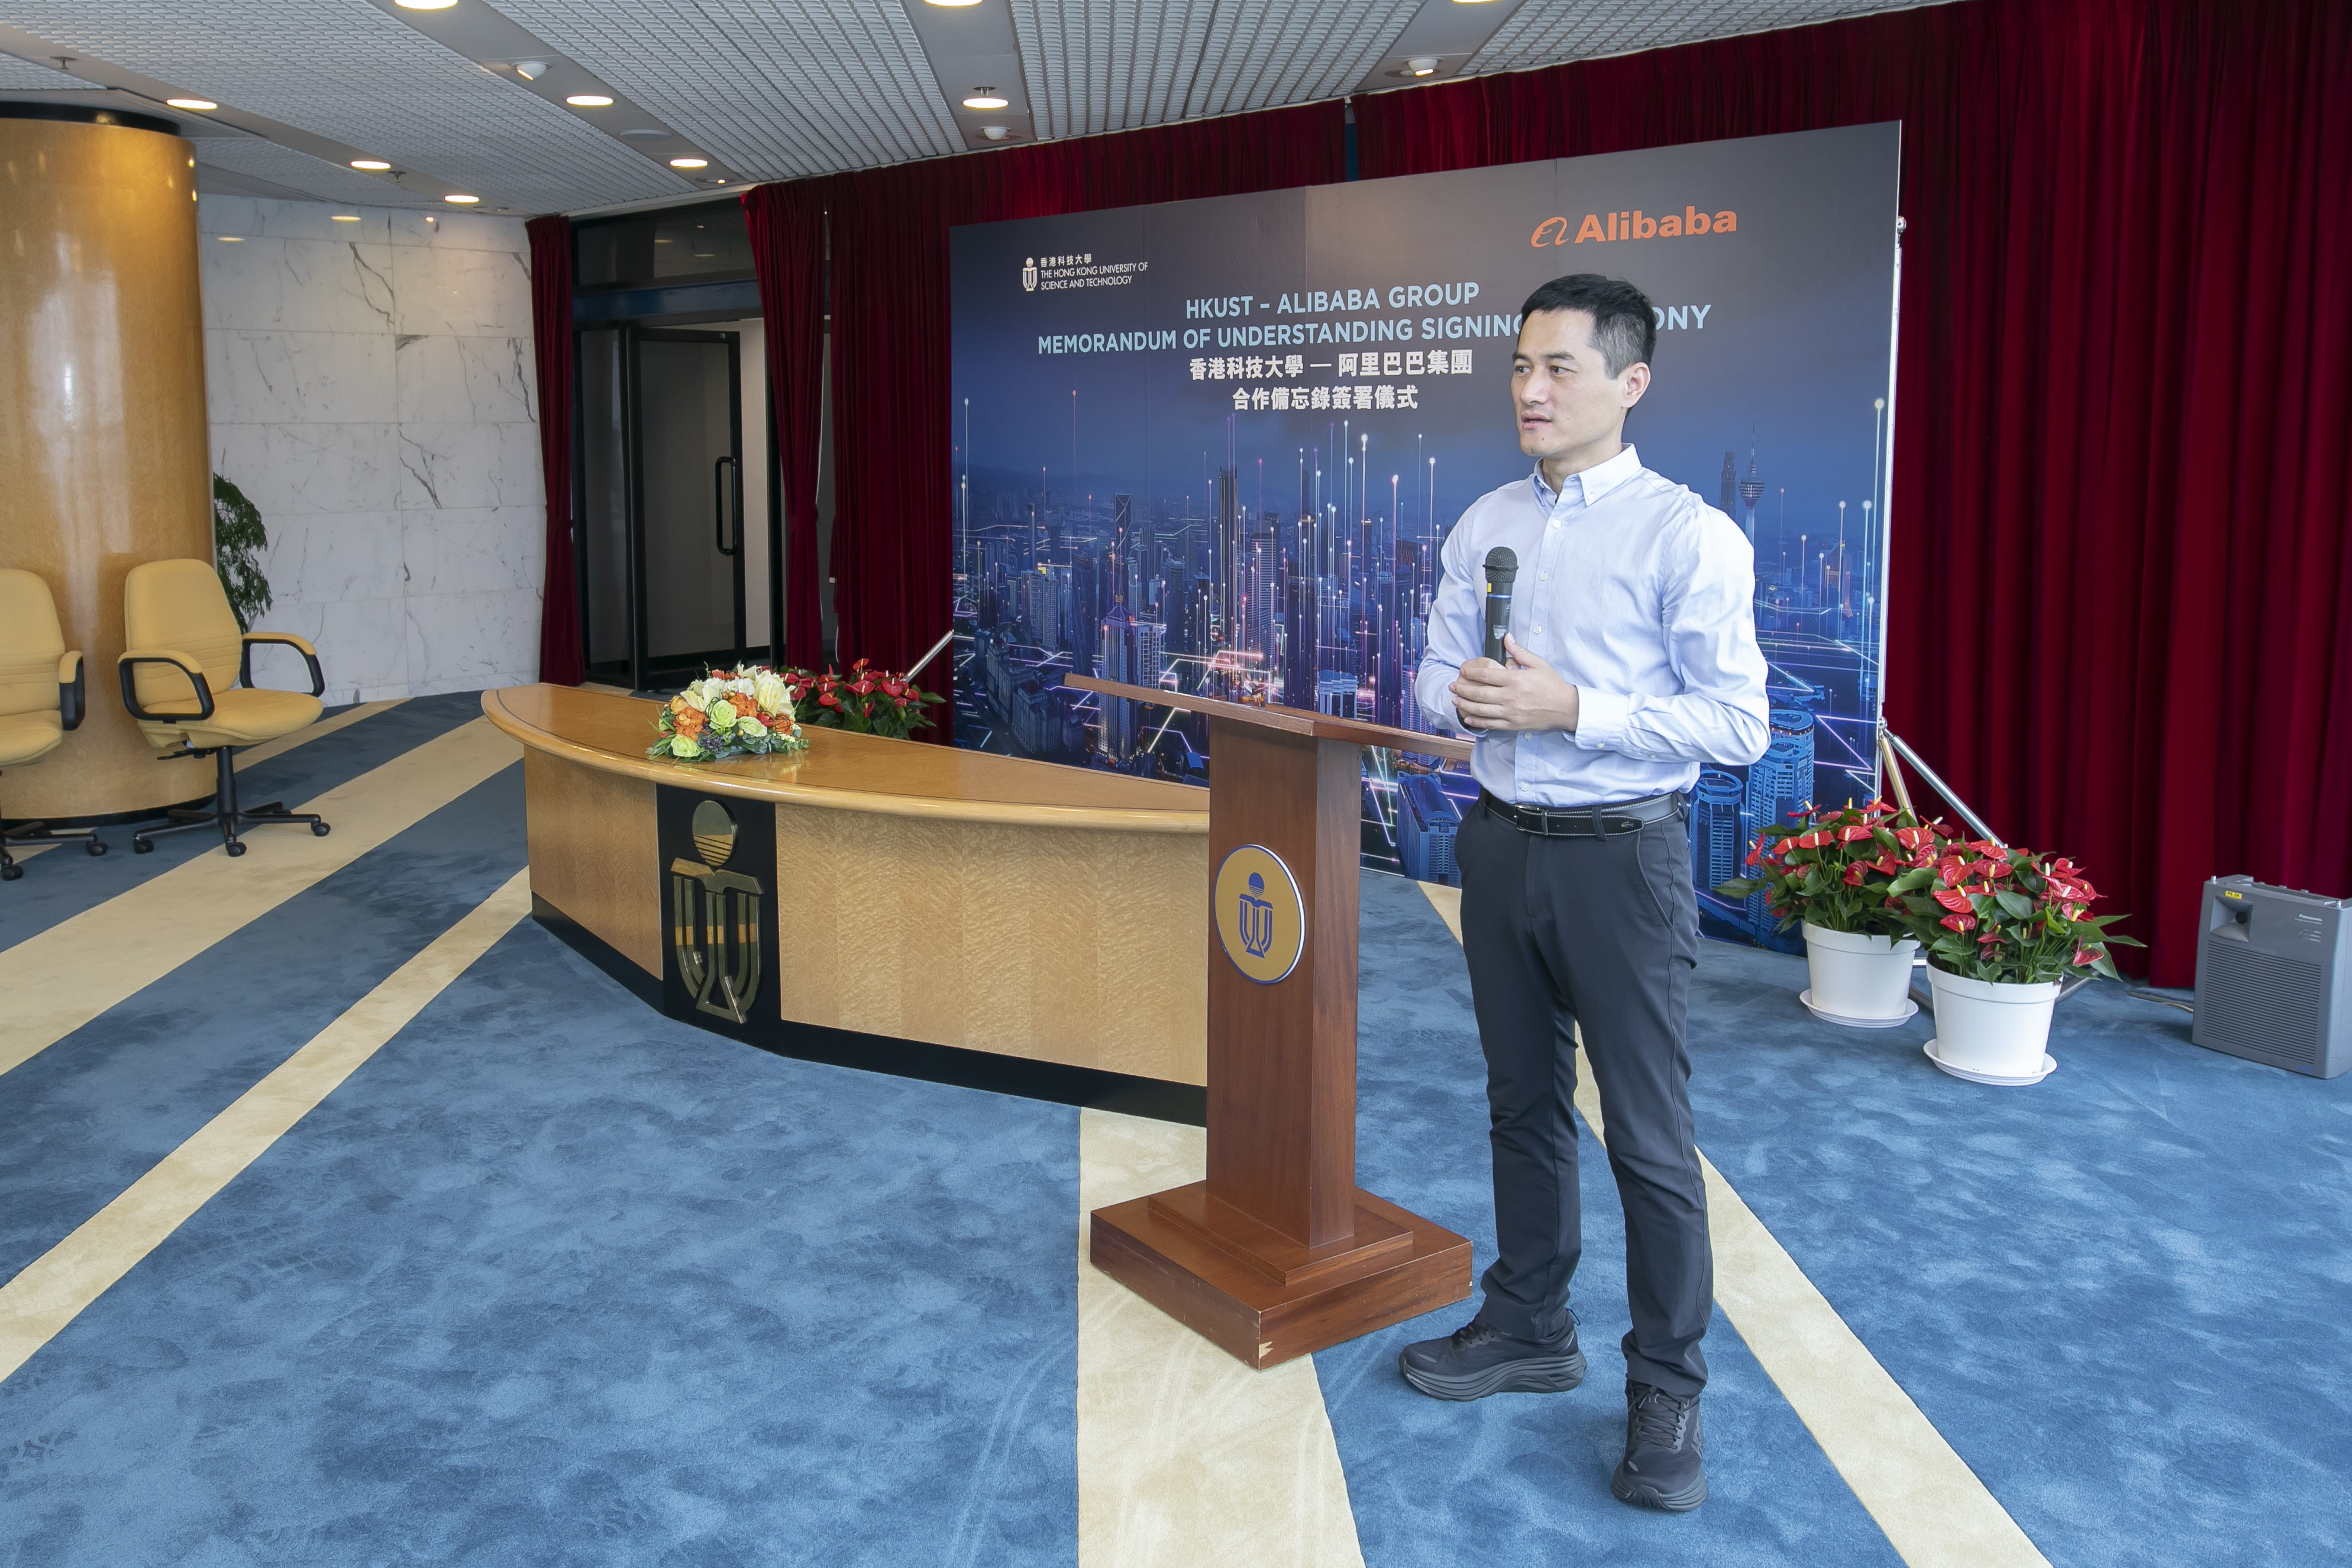 WU Zeming, Chief Technology Officer of Alibaba Group, delivers a speech at the ceremony.